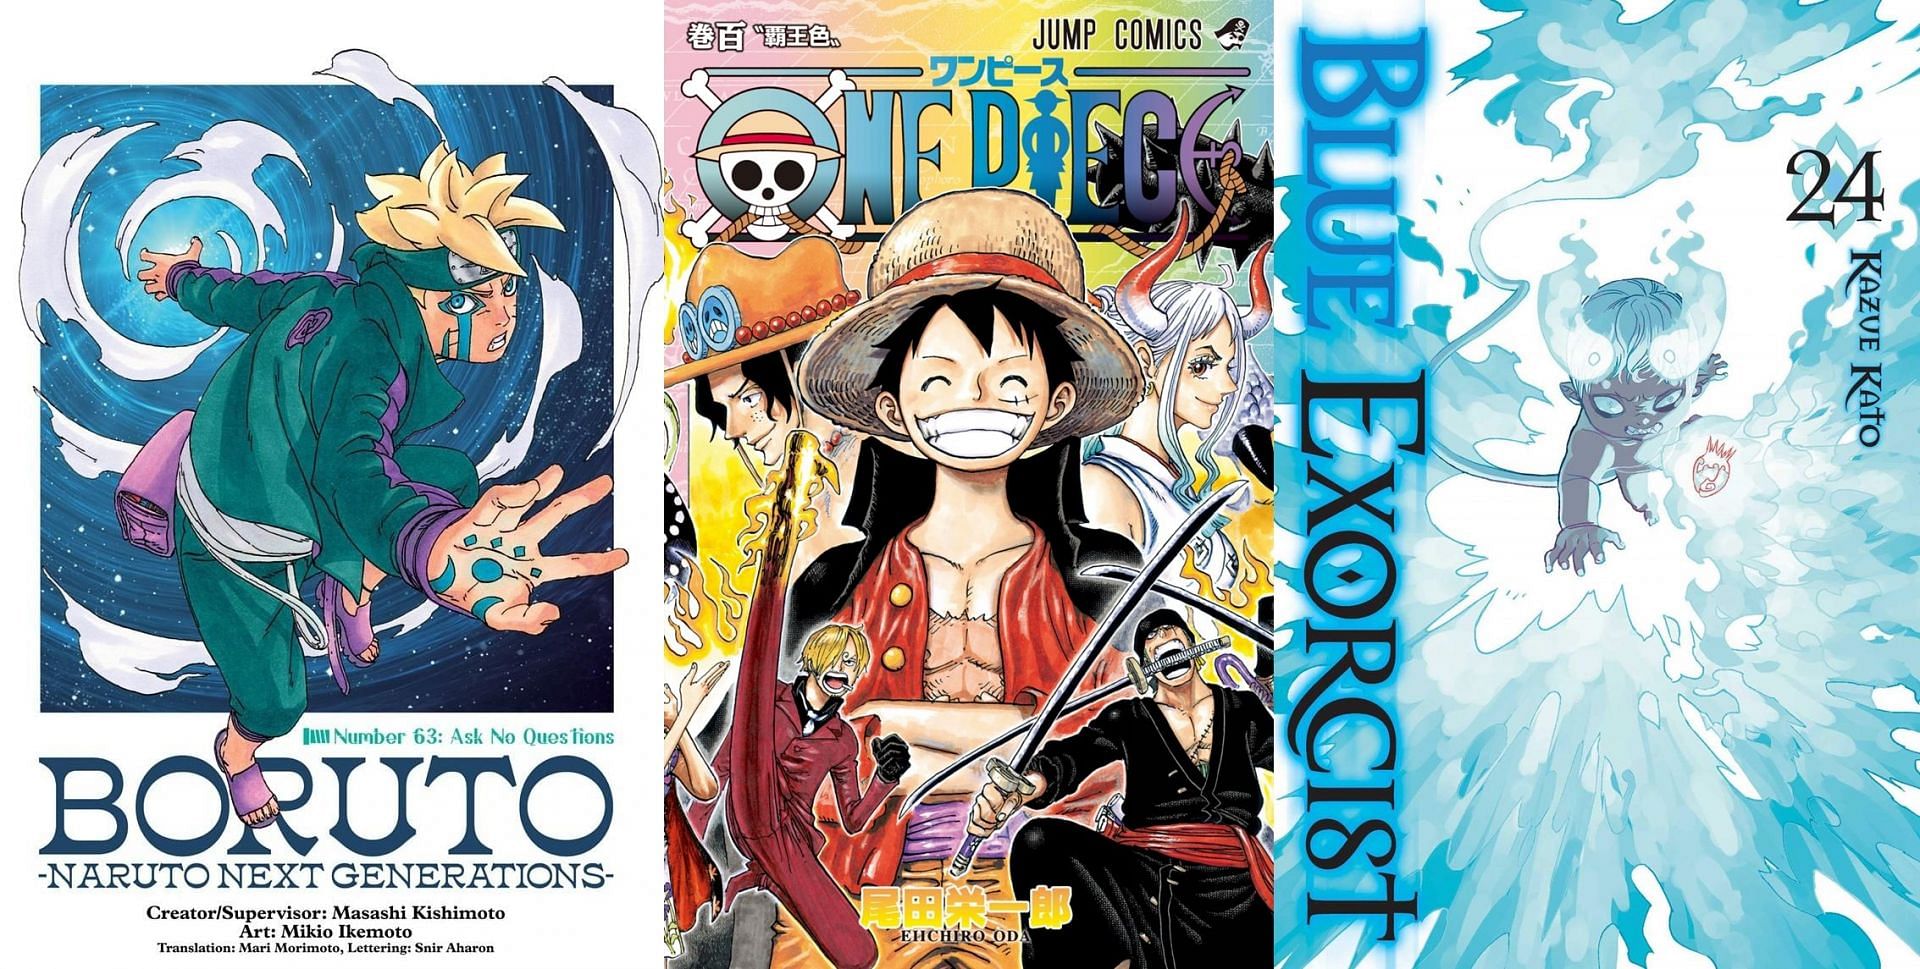 Manga and anime to go on hiatus in 2022: One Piece, Boruto, and more